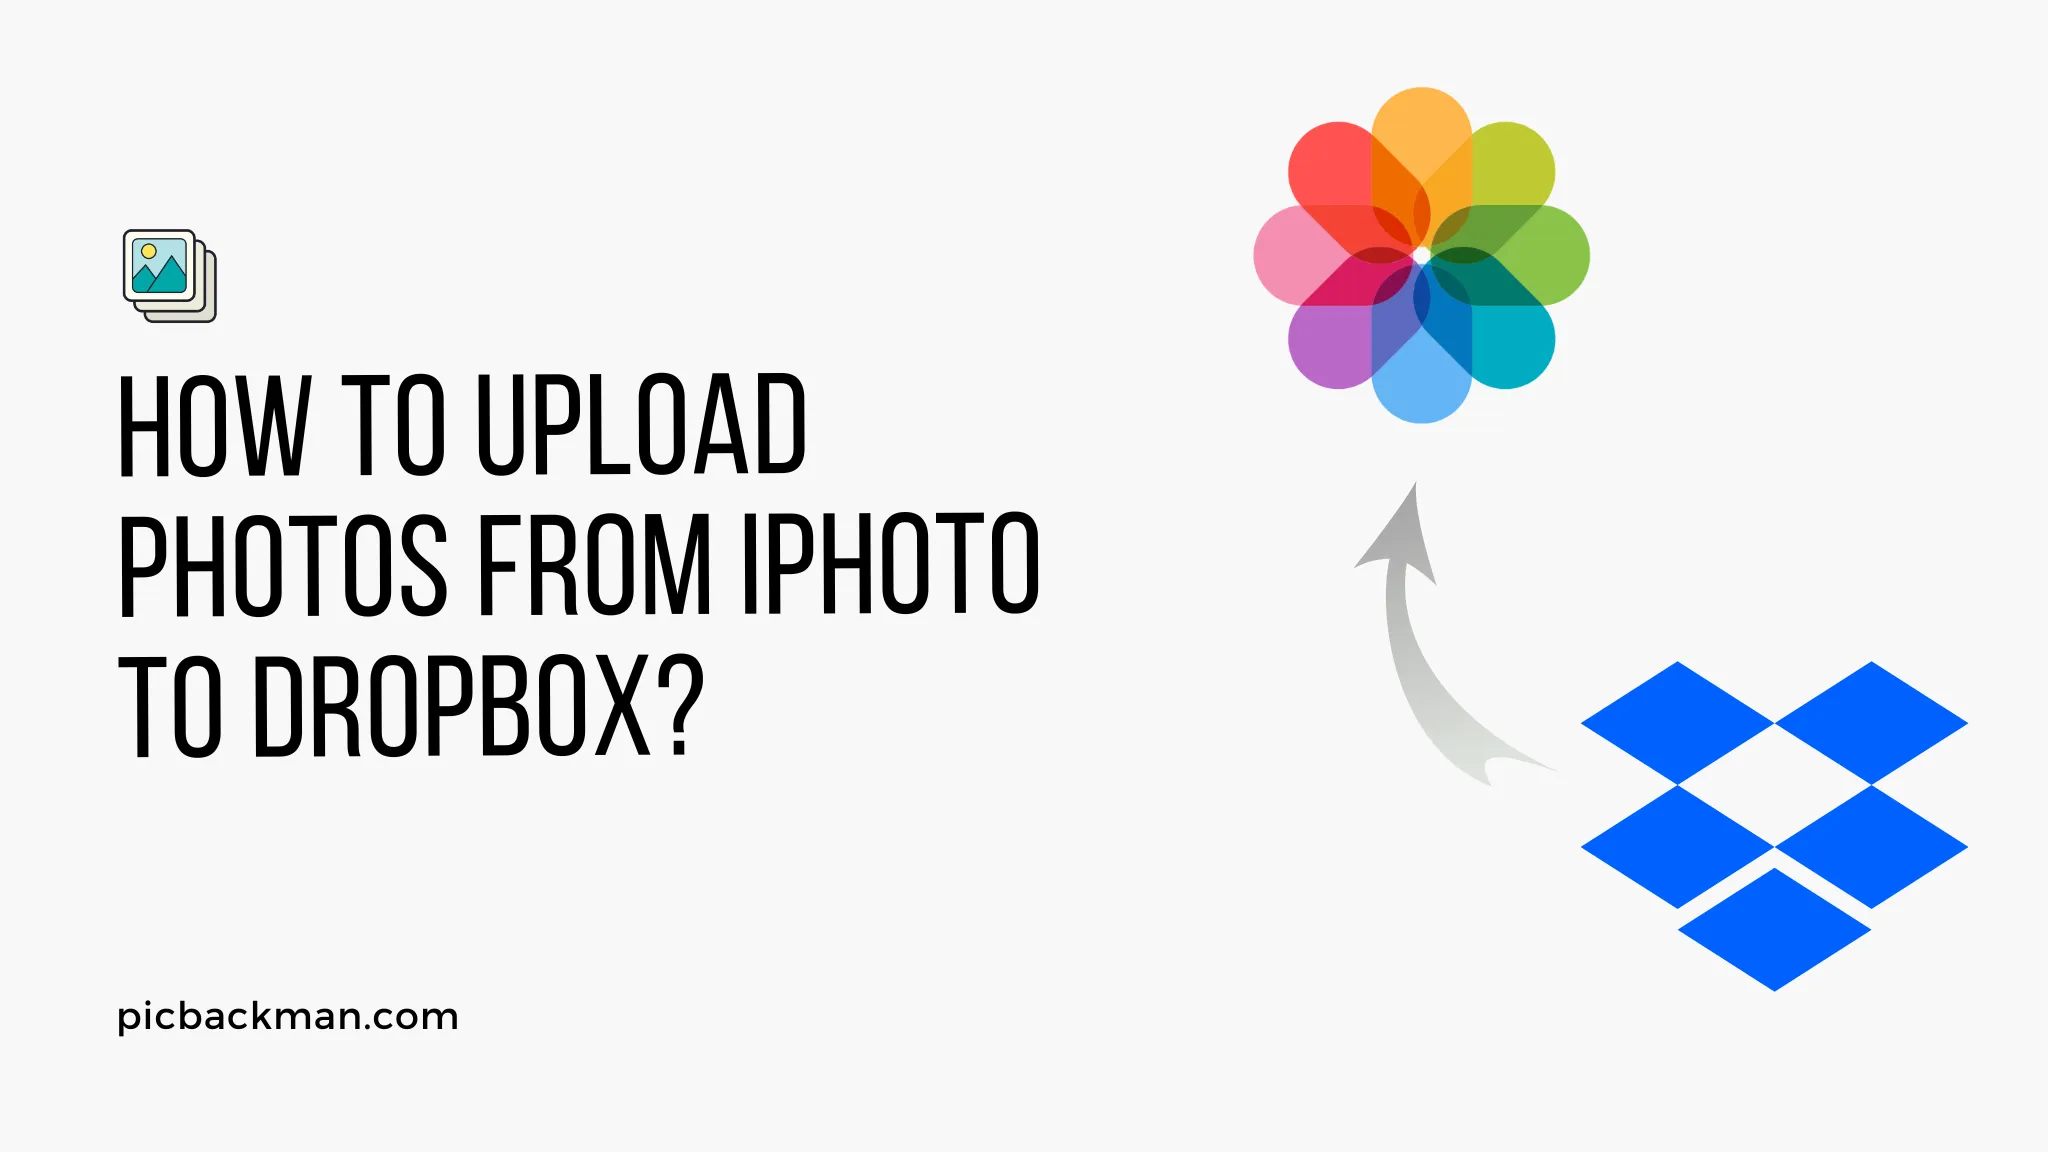 How to upload photos from iPhoto to Dropbox